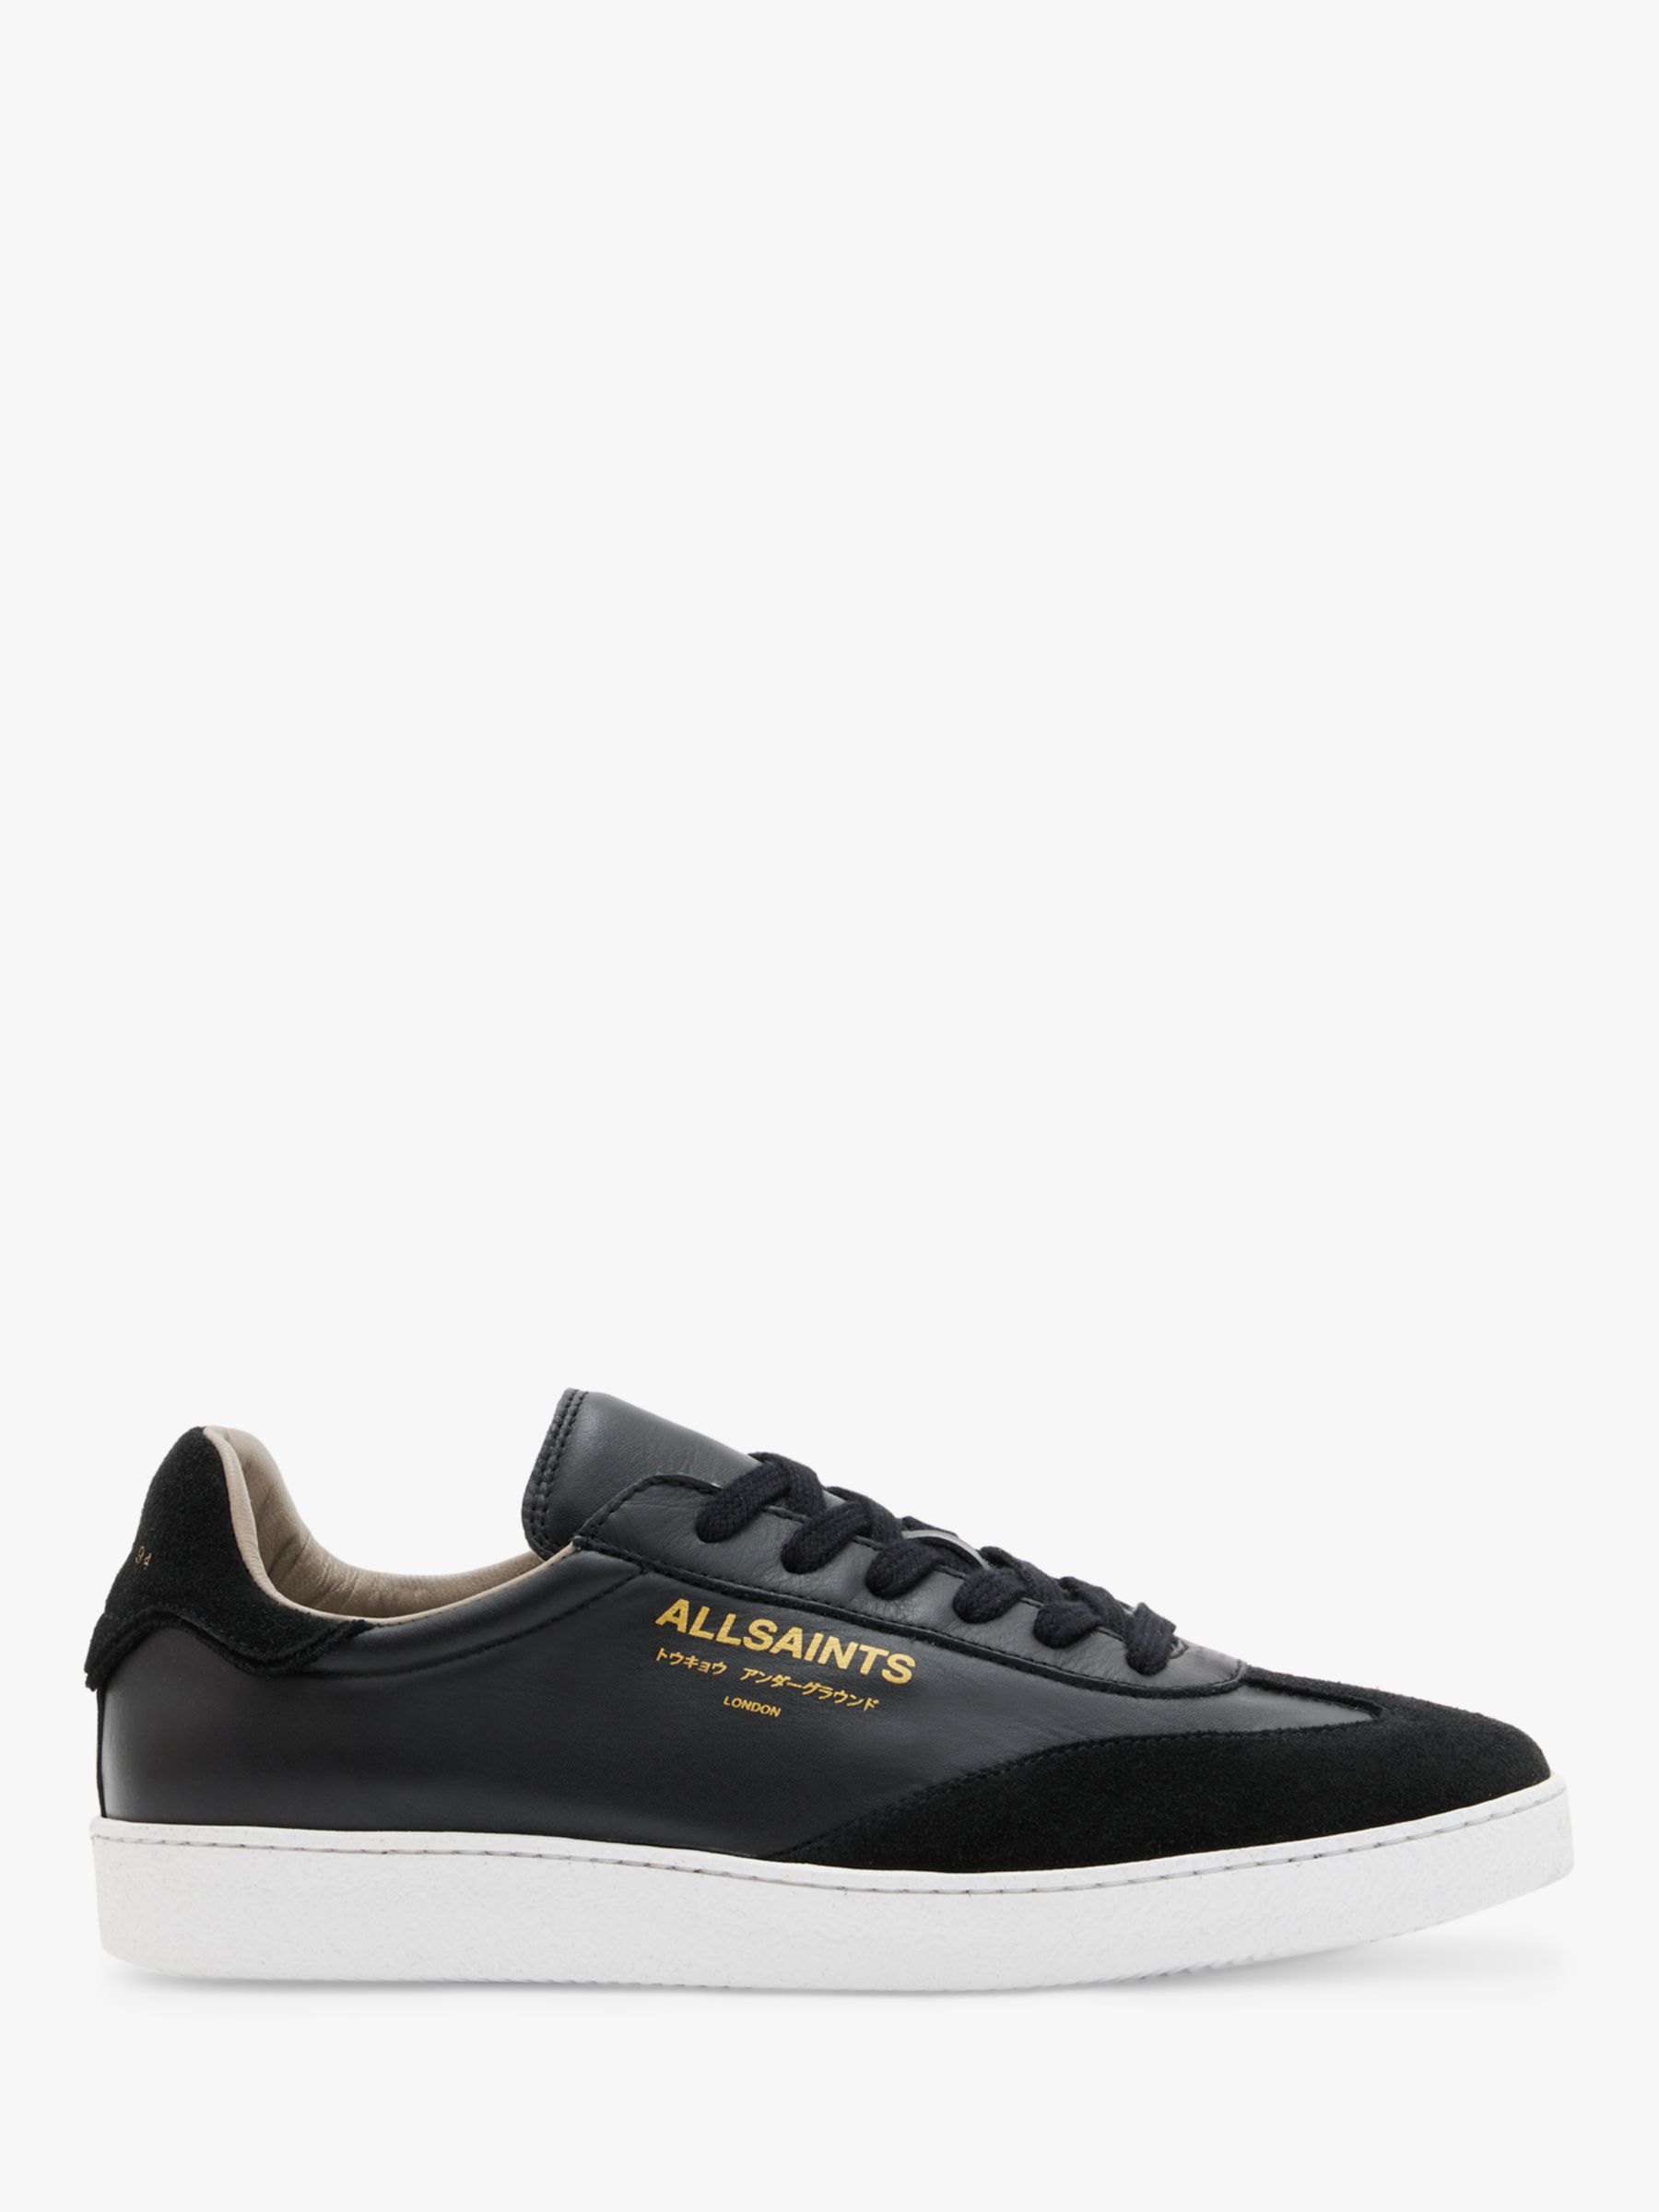 AllSaints Thelma Leather Trainers, Black at John Lewis & Partners